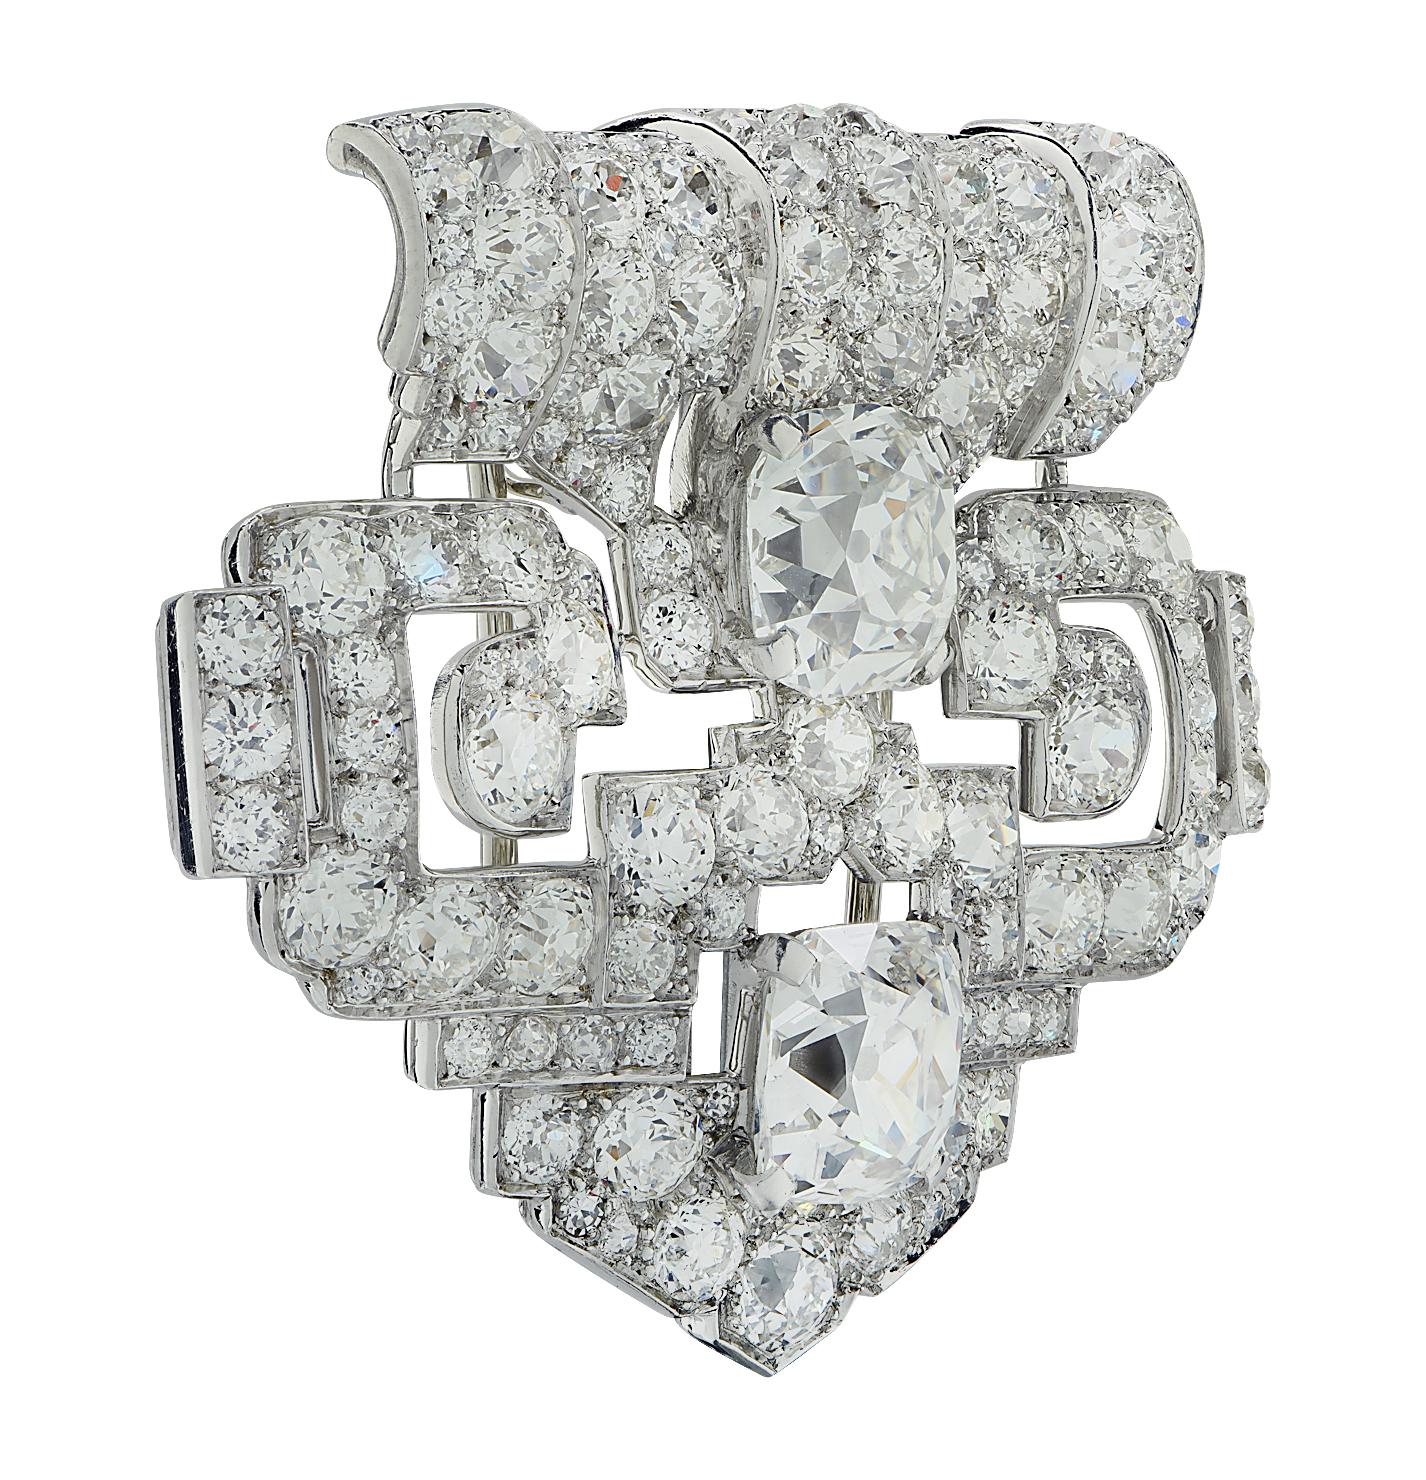 Art Deco Cartier New York GIA Certified 11.24 Carat Old Mine Cushion Diamond Brooch For Sale